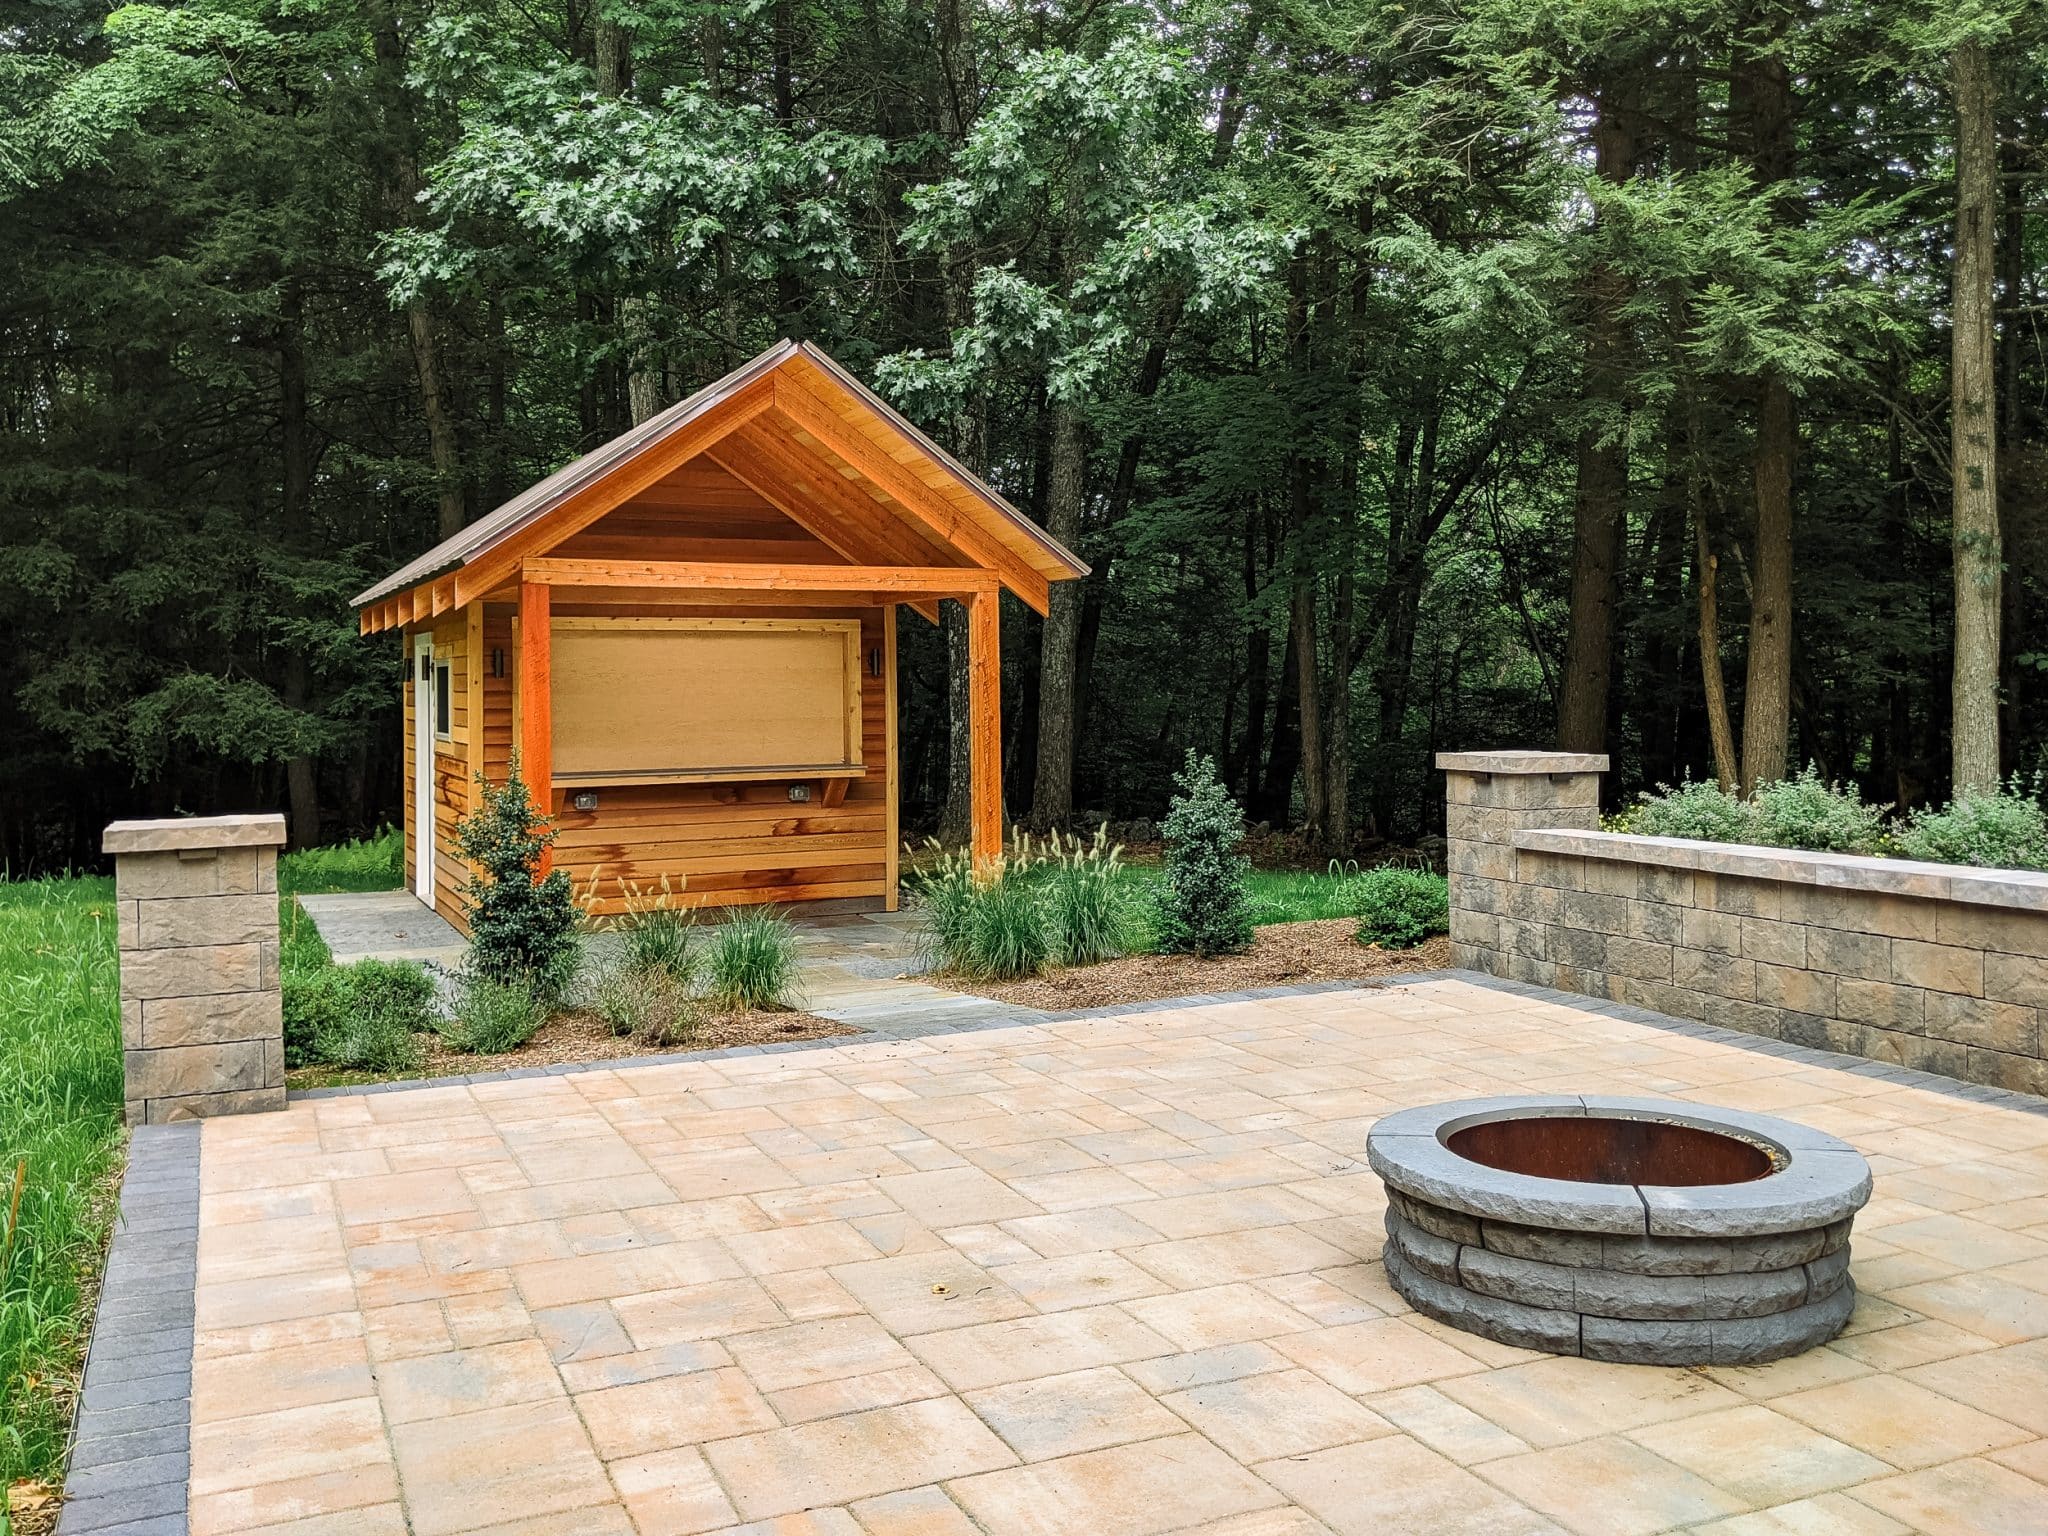 A wooden bar shed next to a precast concrete patio with pillars and a retaining wall and a circular firepit, installed by Masseo Landscape, in Stone Ridge, NY